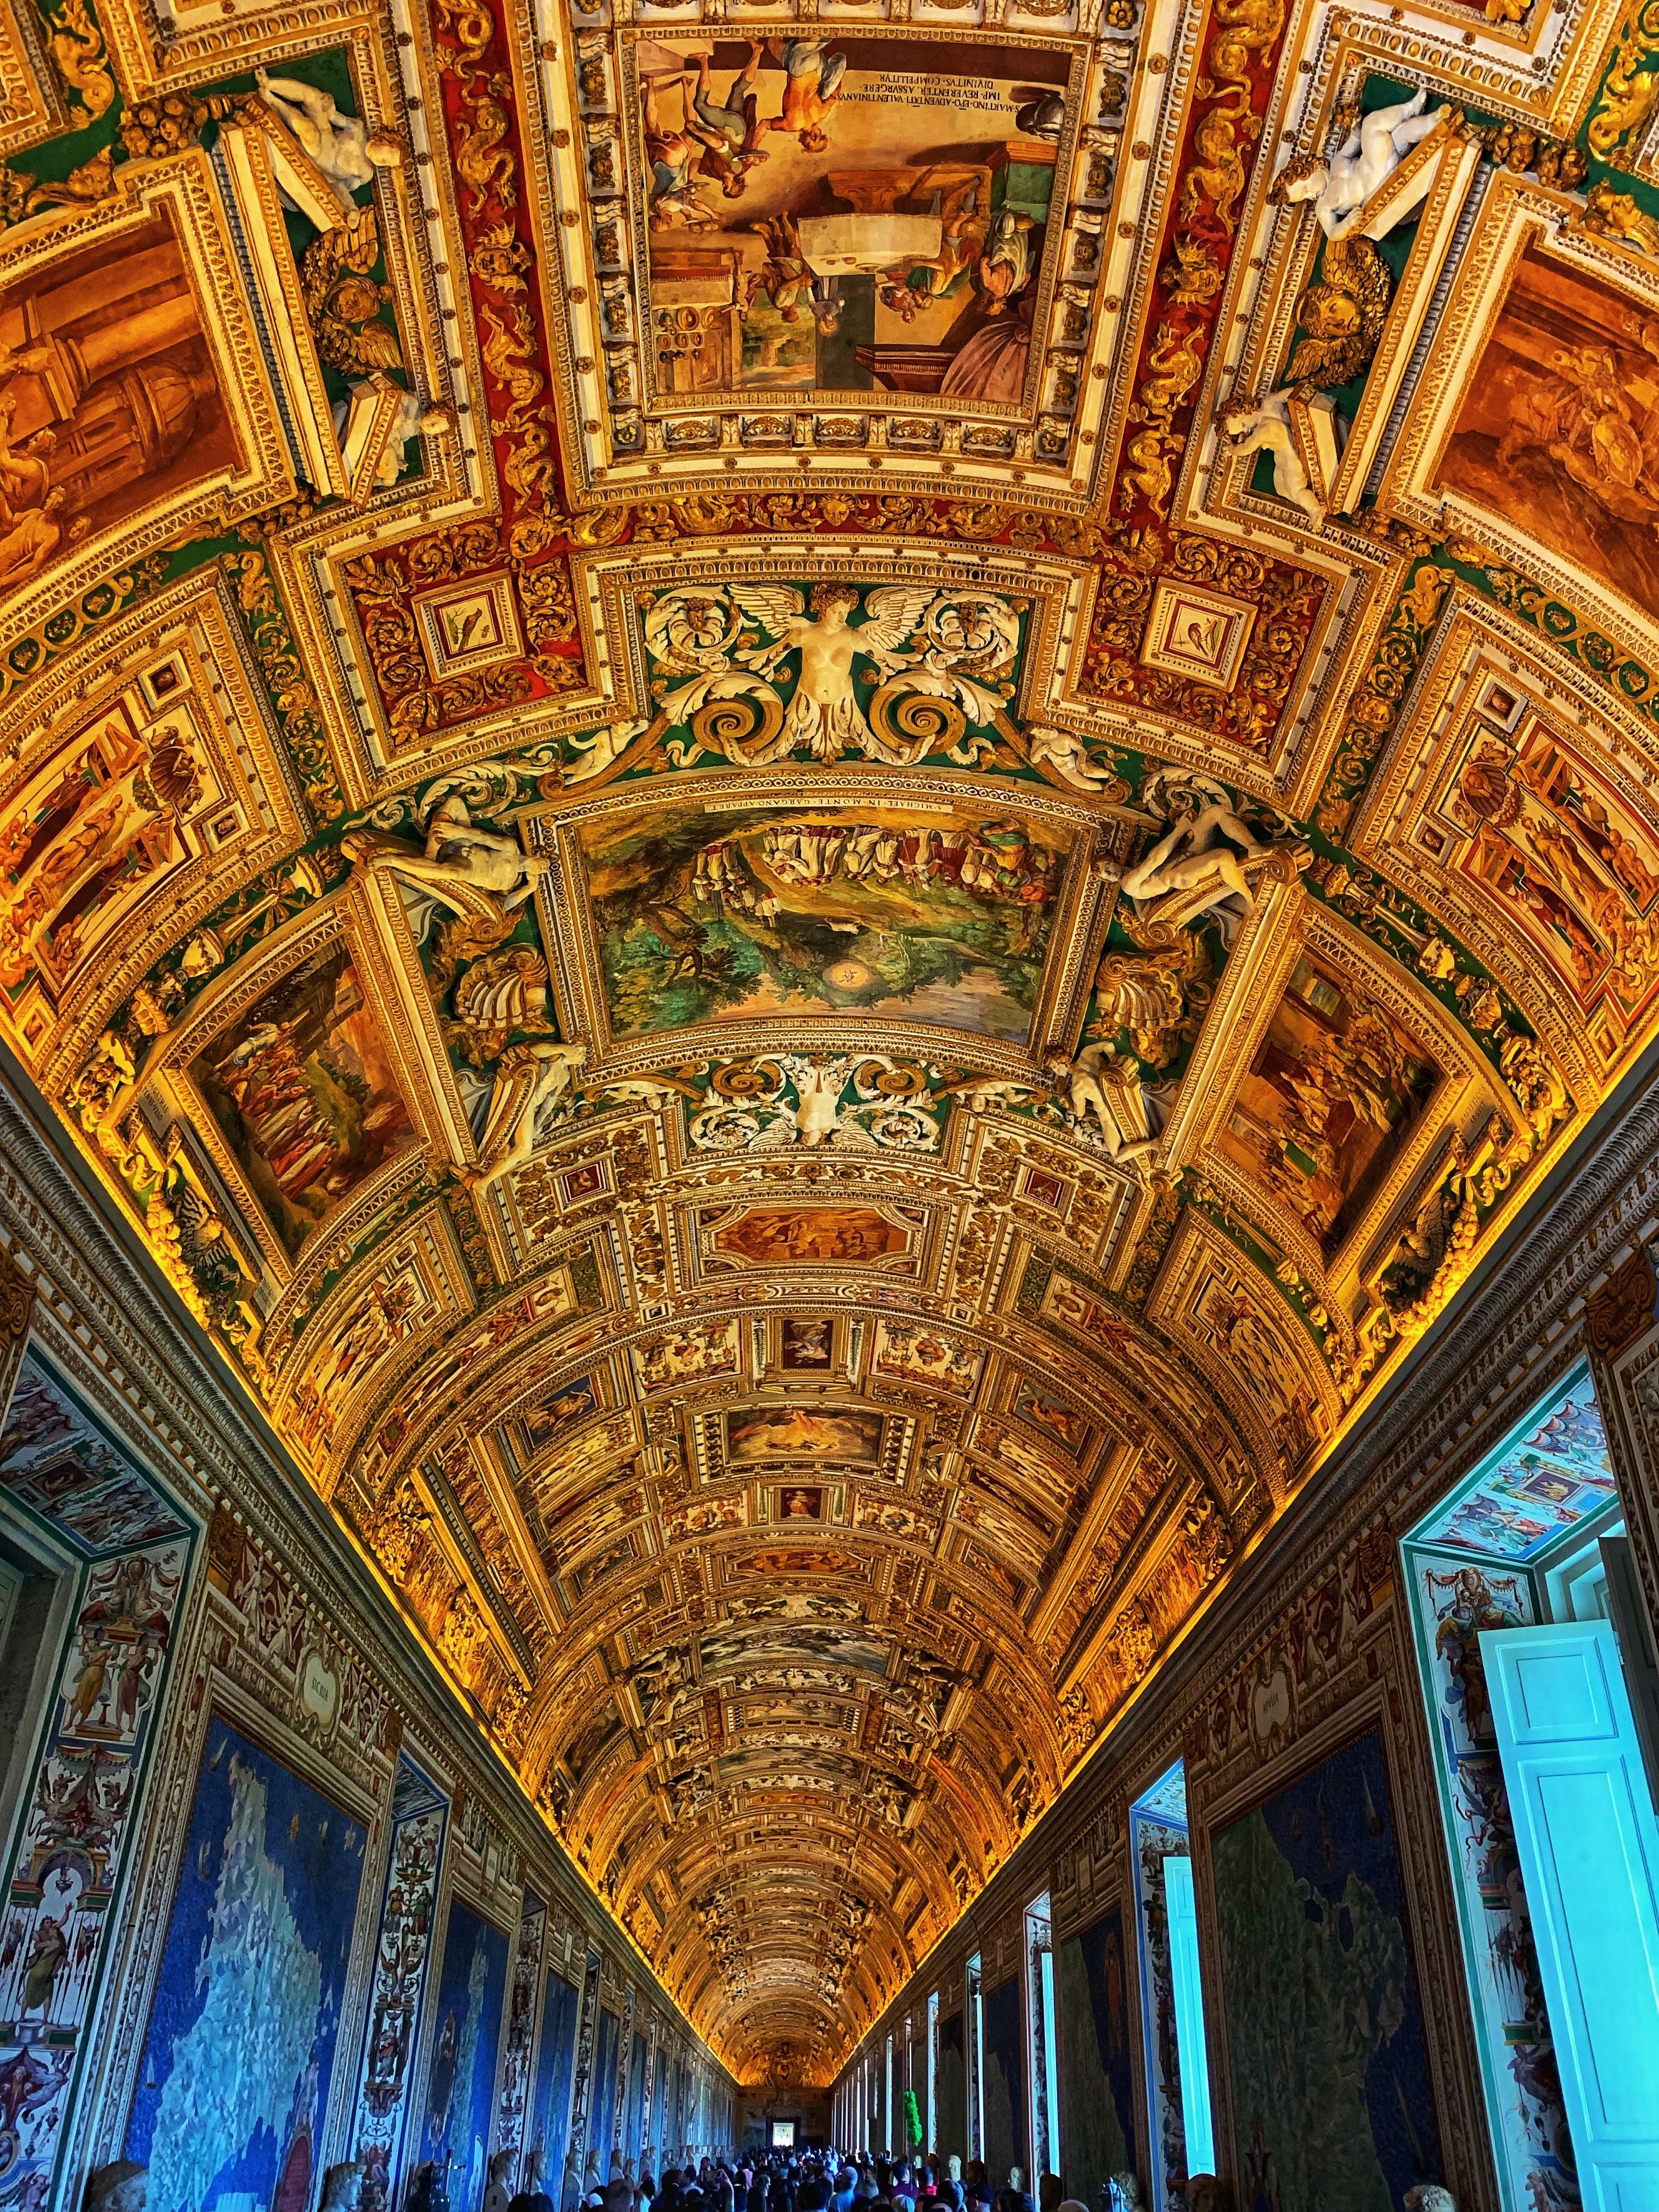 The ceiling of the historic Sistine Chapel